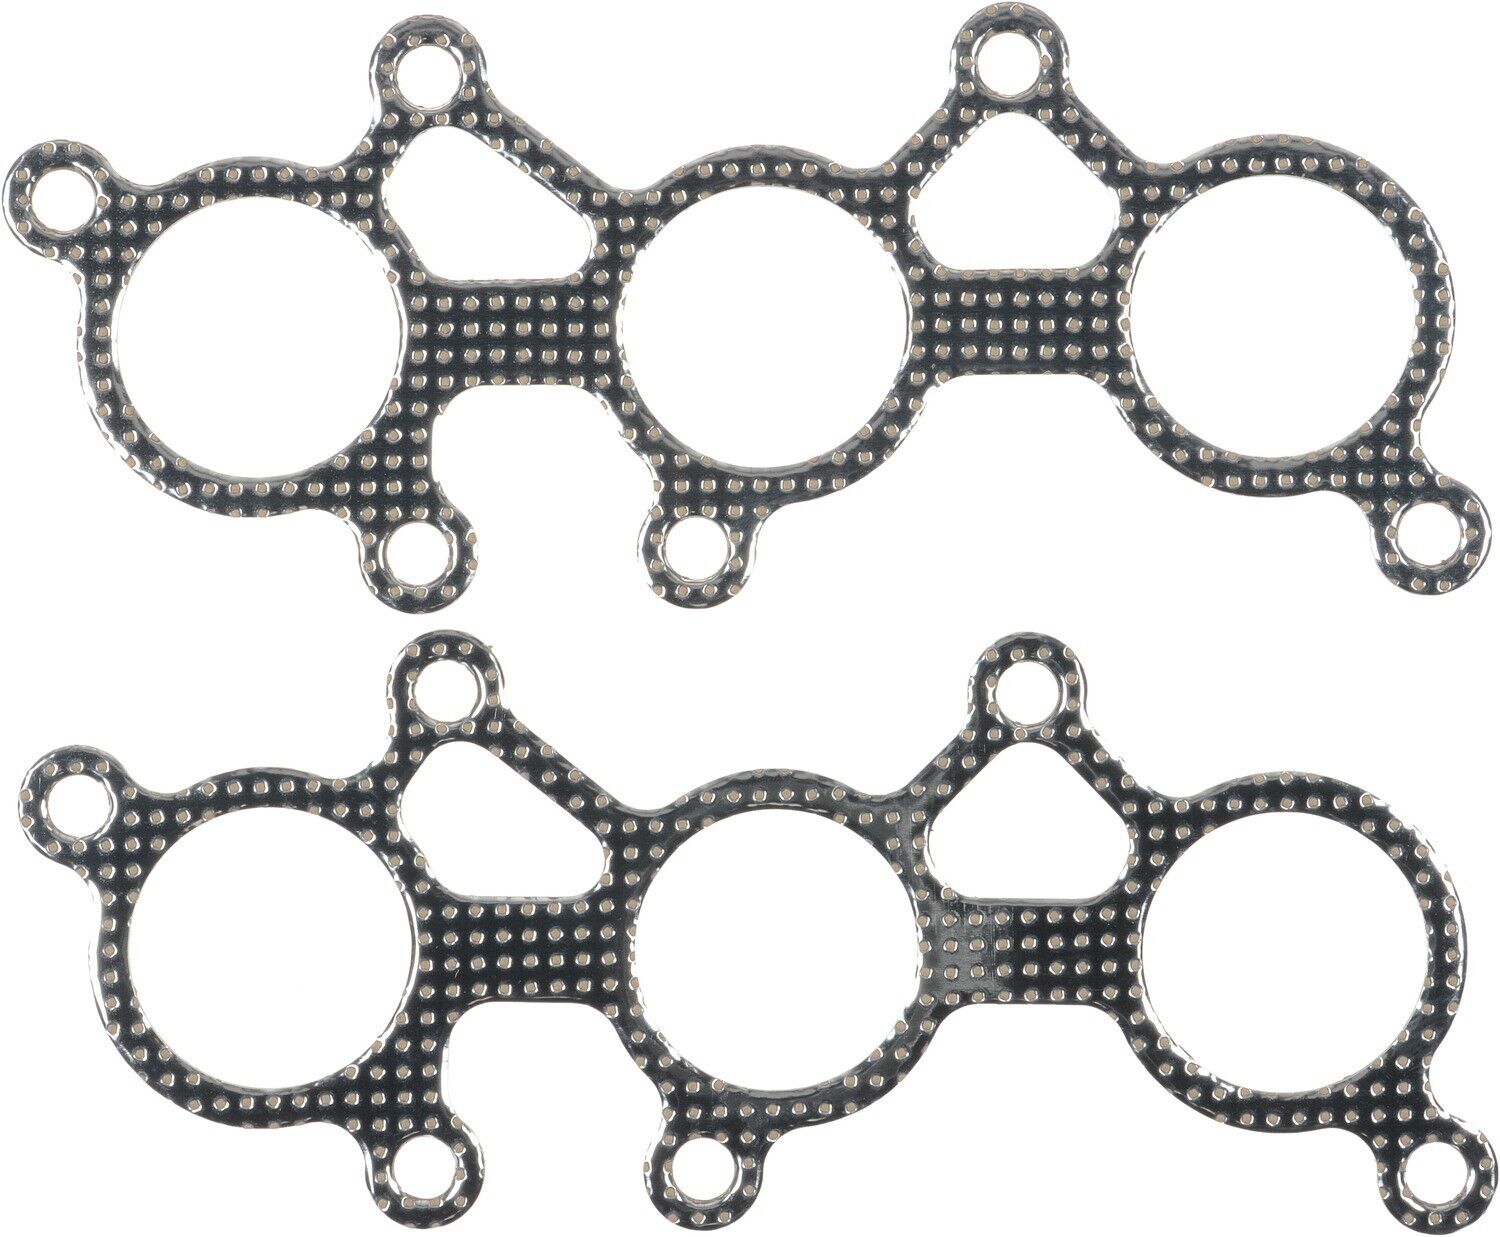 Exhaust Manifold Gasket Set for ES350, GS450h, RC300, RC350+More 15-42846-01